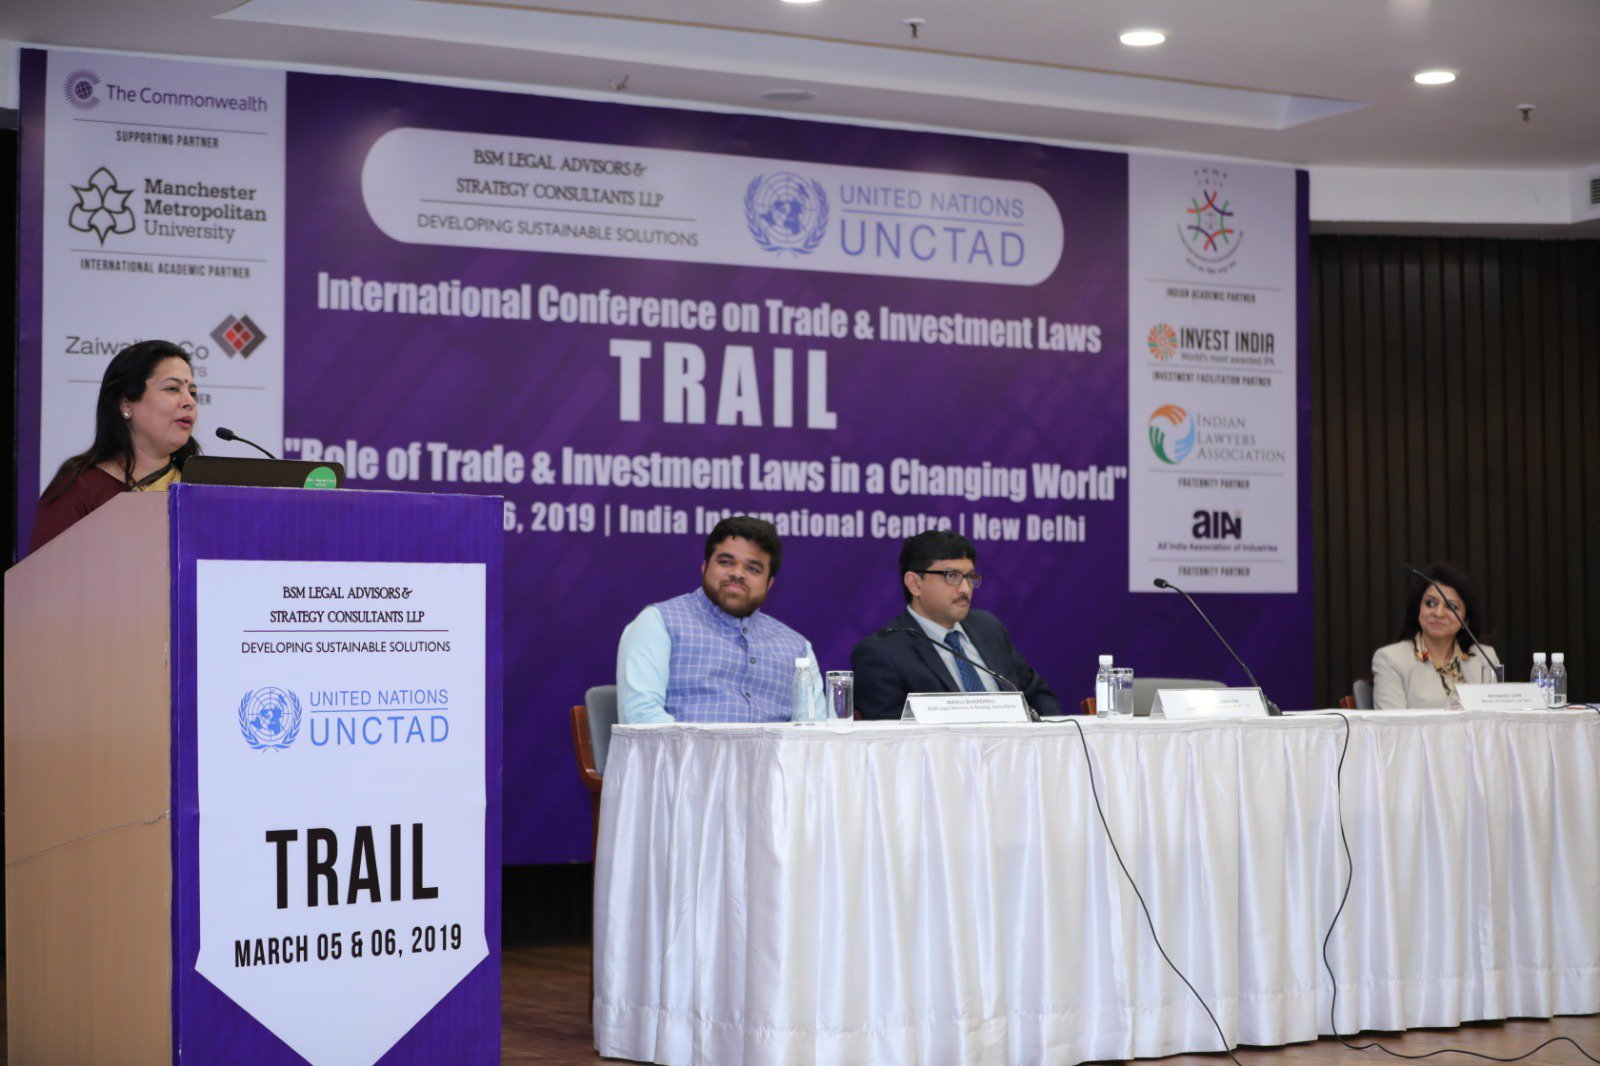 Ms. Meenakshi Lekhi, MP speaking at International Conference on Trade & Investment Laws (TRAIL)